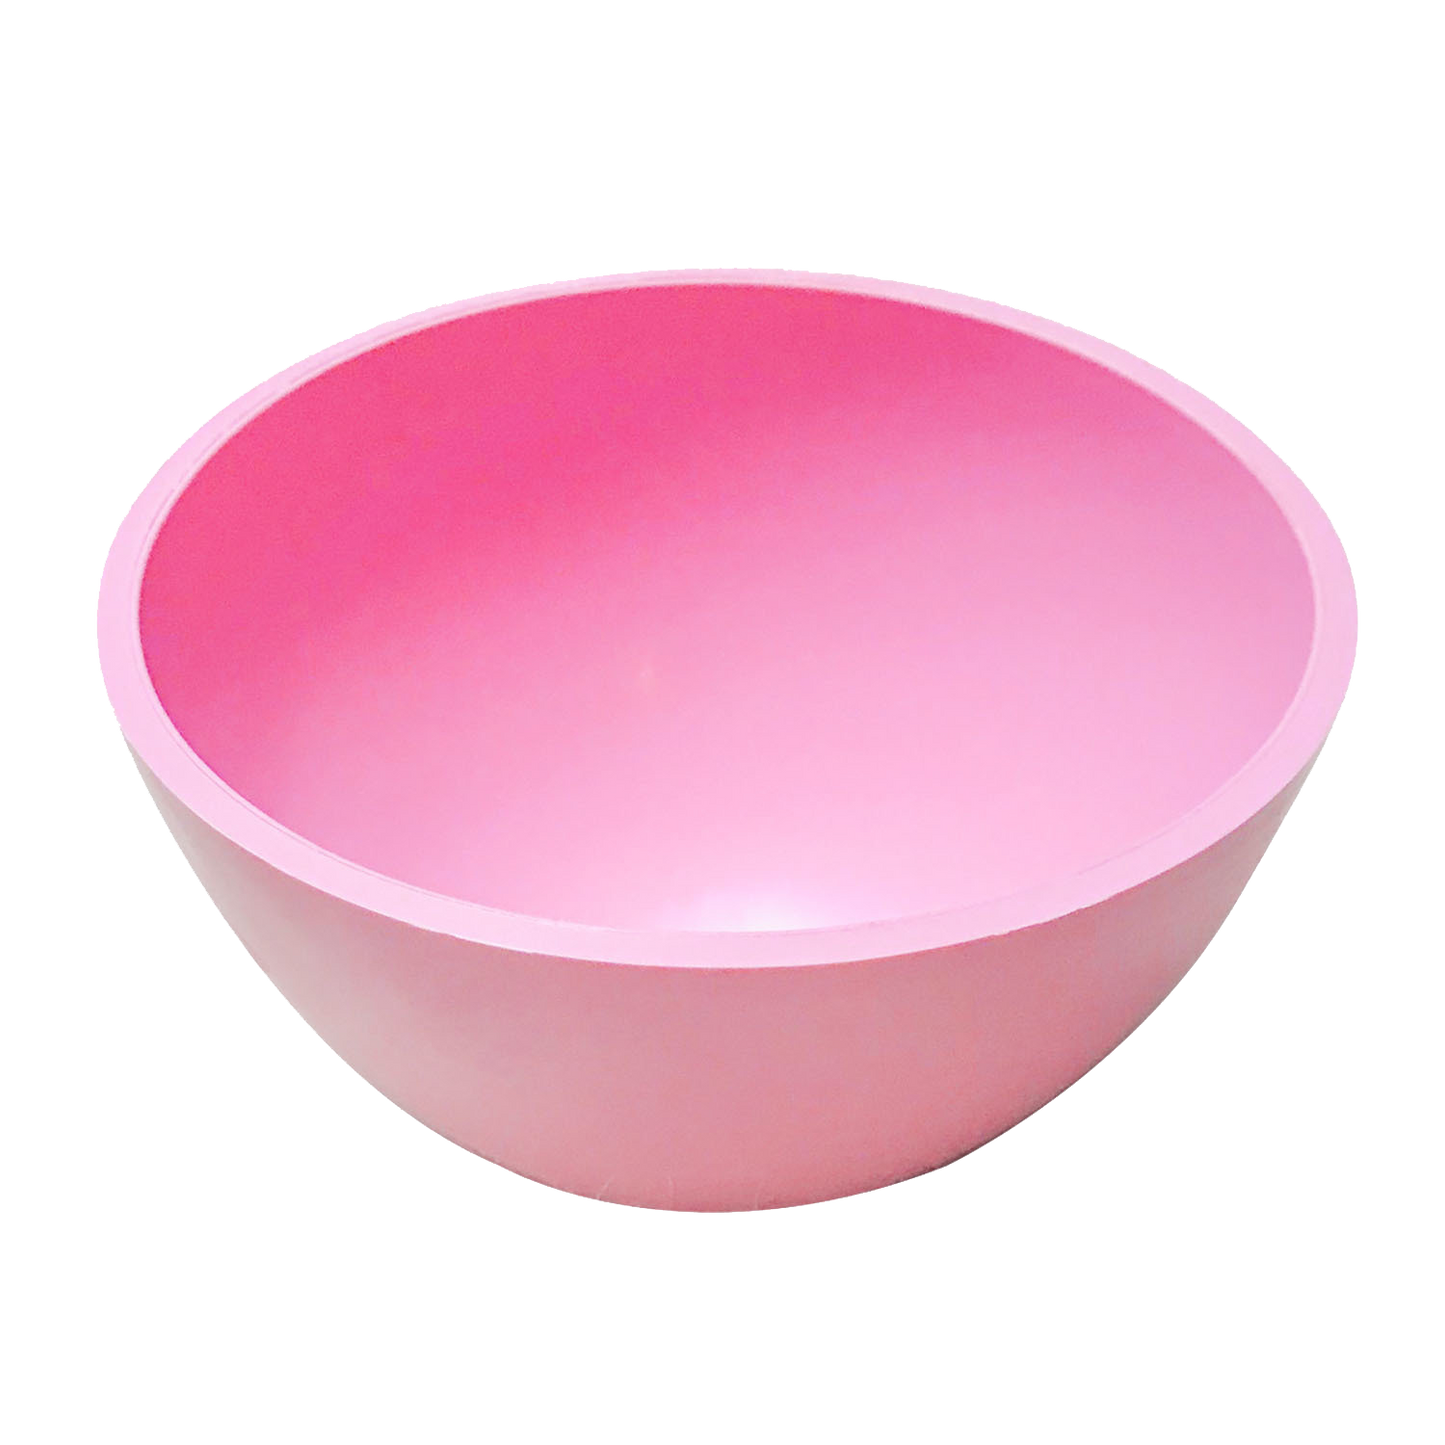 Rubber Mixing Bowls in Pink - Flexible, Medical Grade